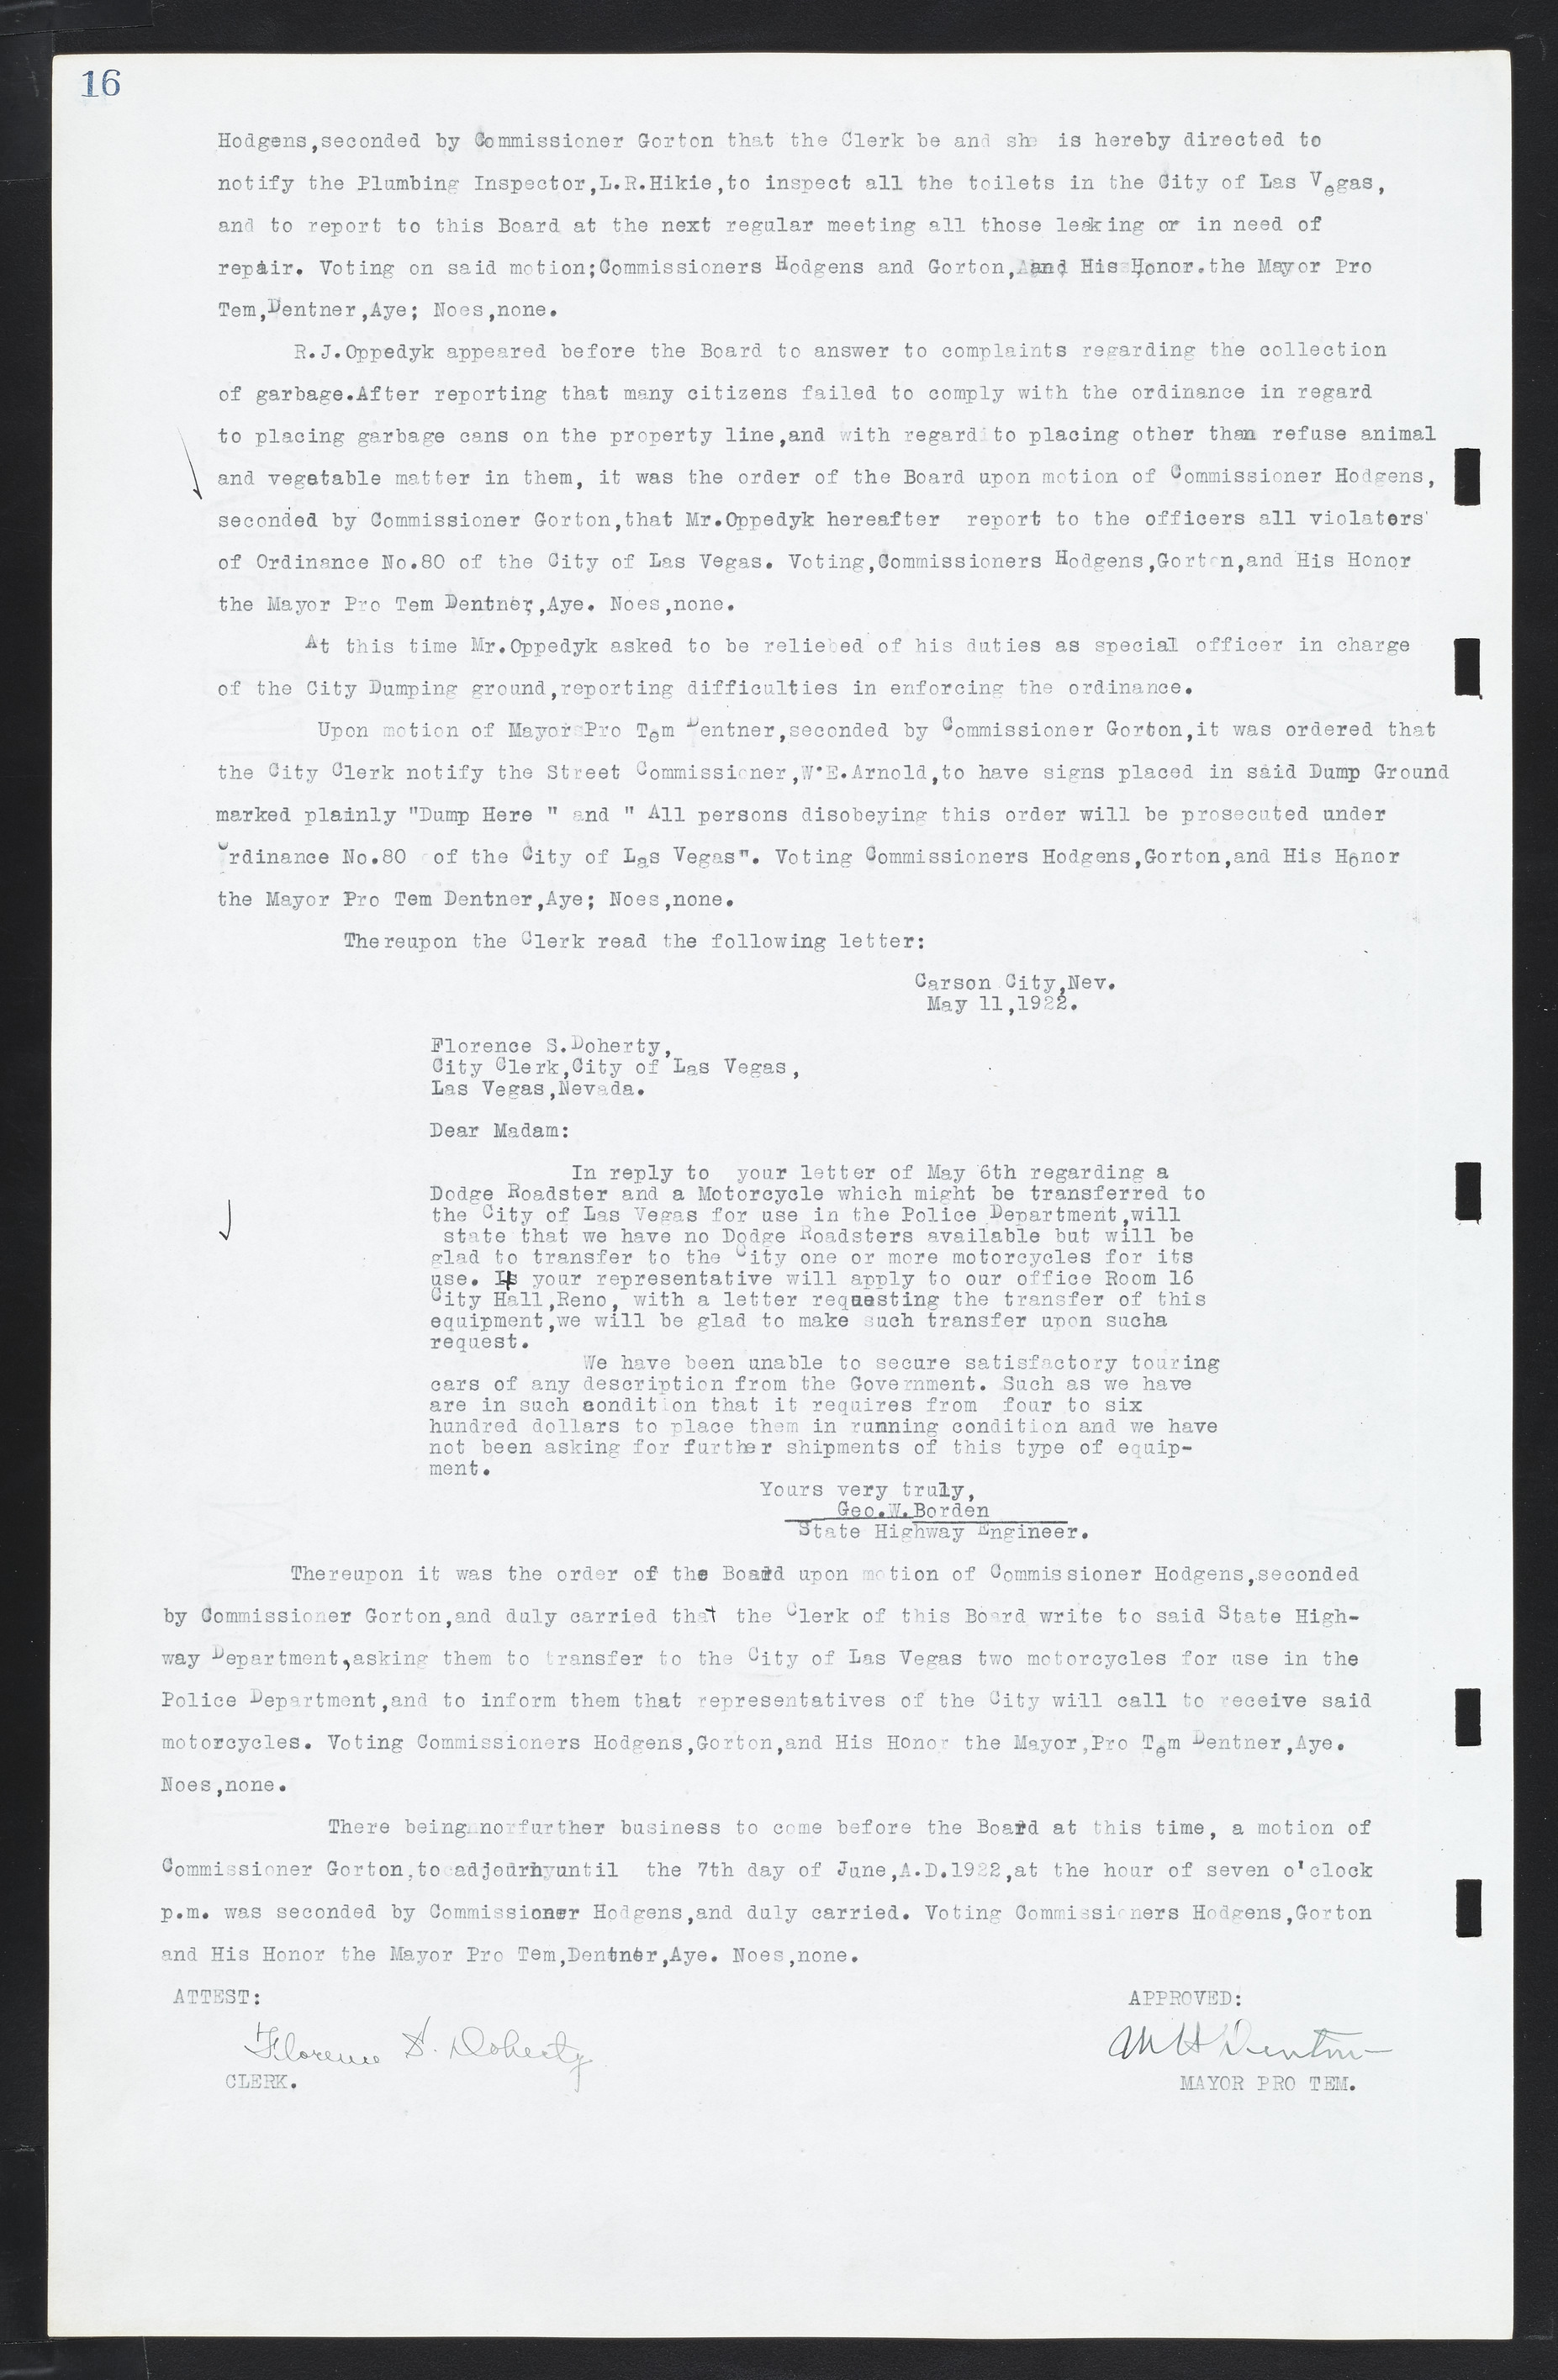 Las Vegas City Commission Minutes, March 1, 1922 to May 10, 1929, lvc000002-23